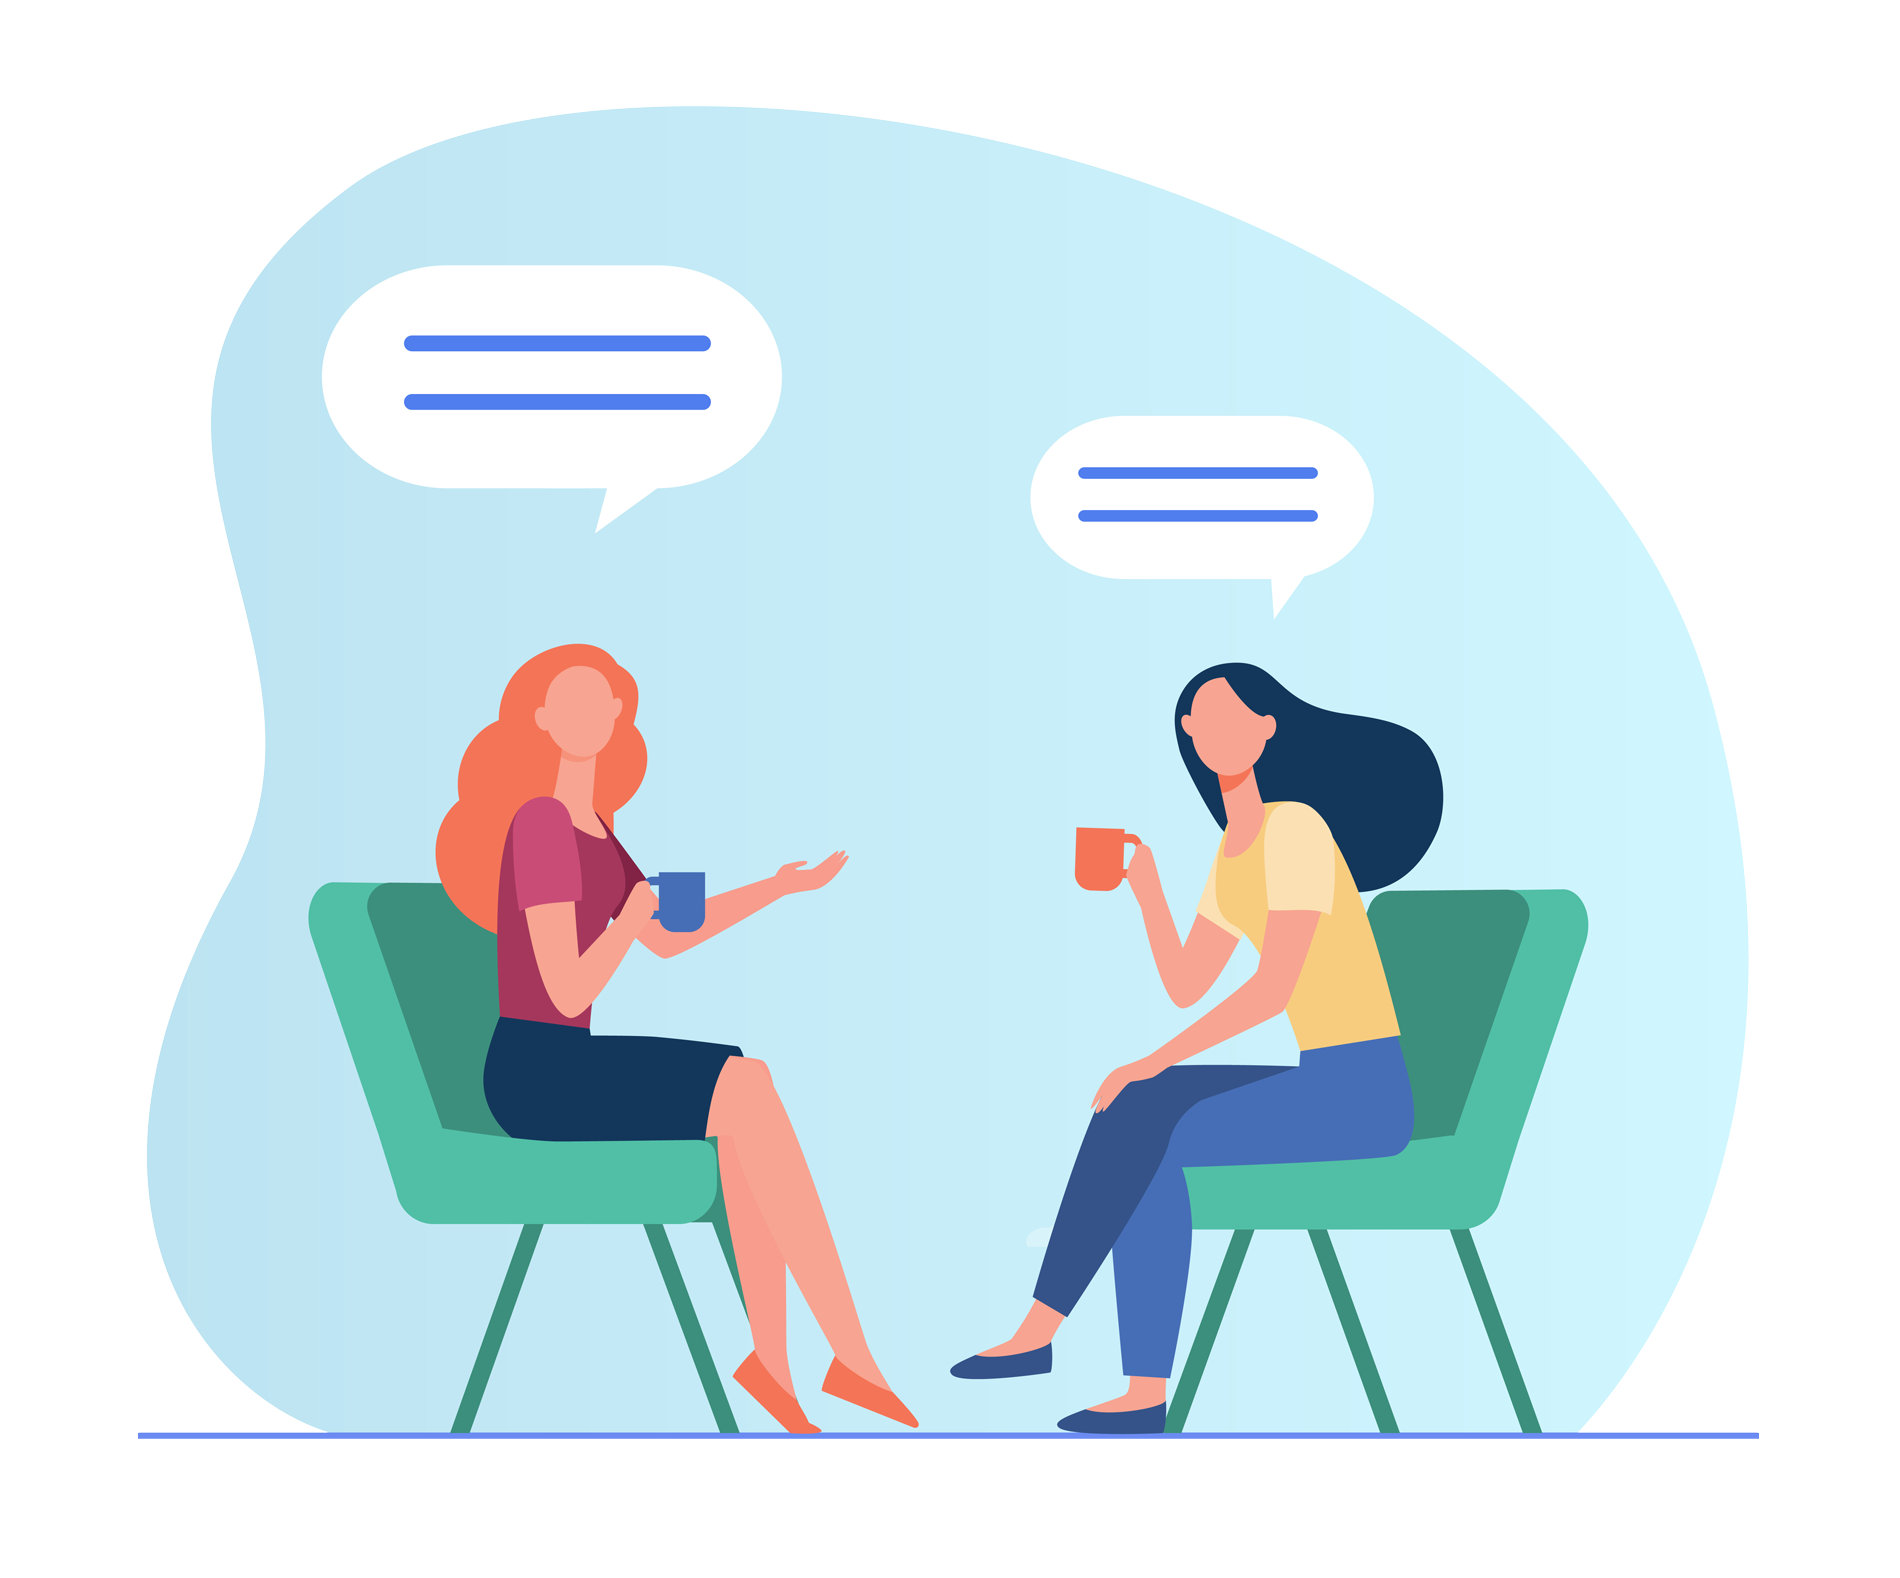 Babel - Chat & Dating - Connect to talk with and meet new people